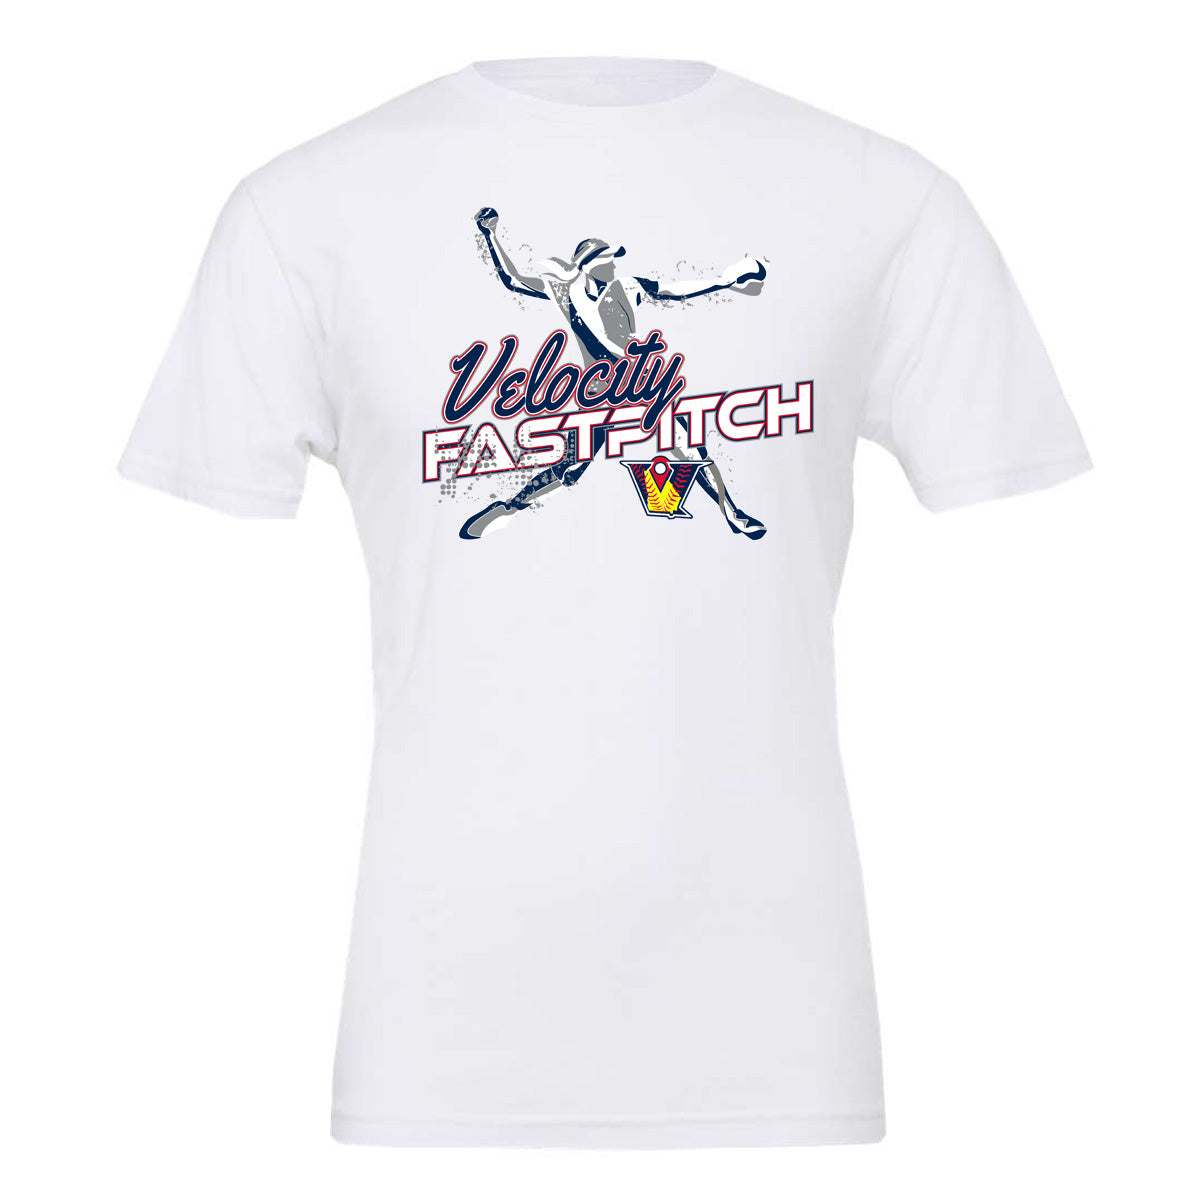 Velo FP - Velocity Fastpitch with Player - White (Tee/Hoodie/Sweatshirt) - Southern Grace Creations